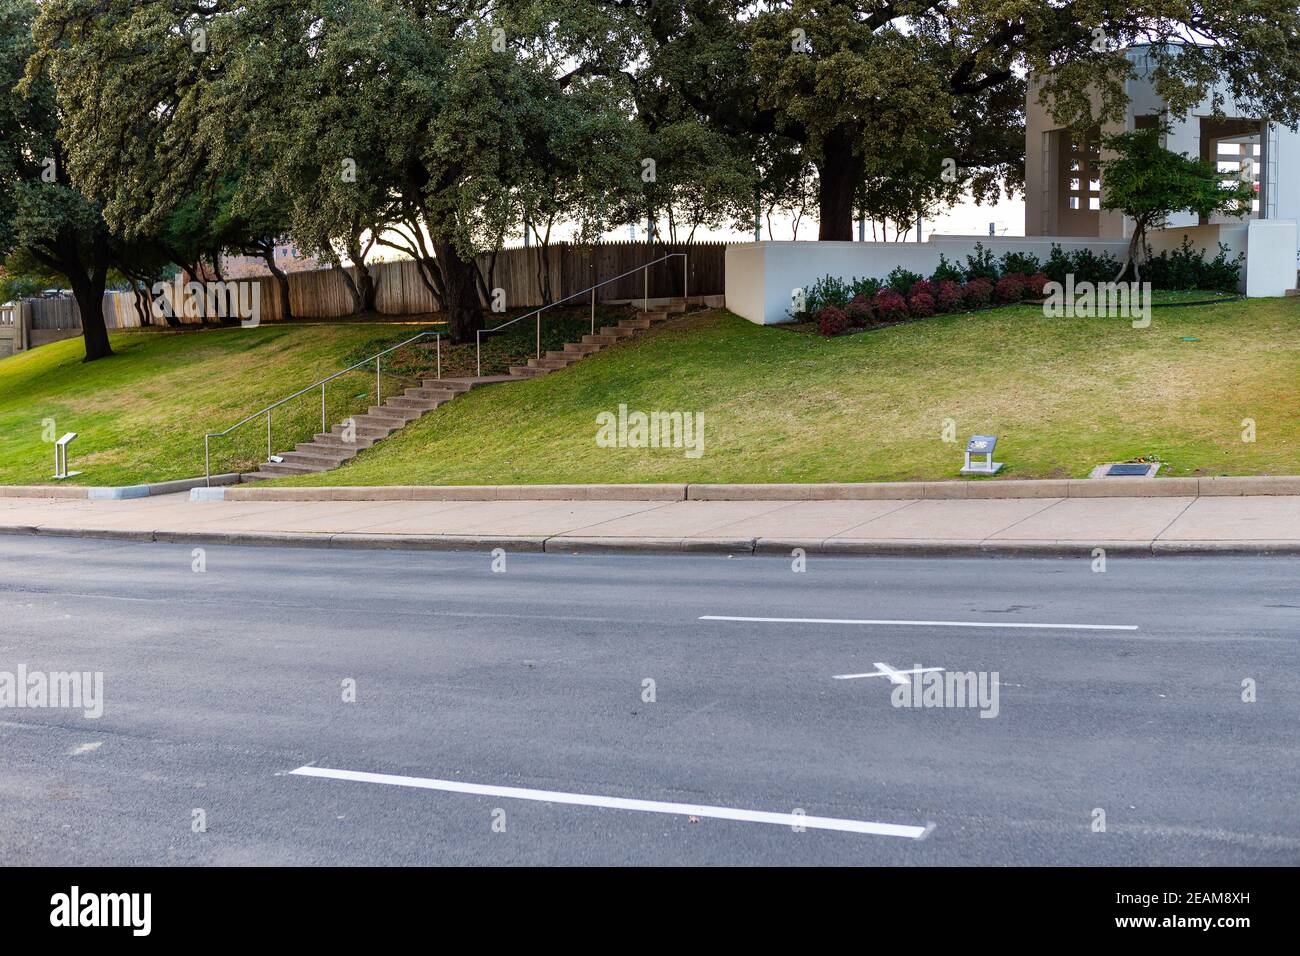 Elm Street, grassy knoll and picket fence at edge of Dealey Plaza, Dallas, Texas Stock Photo